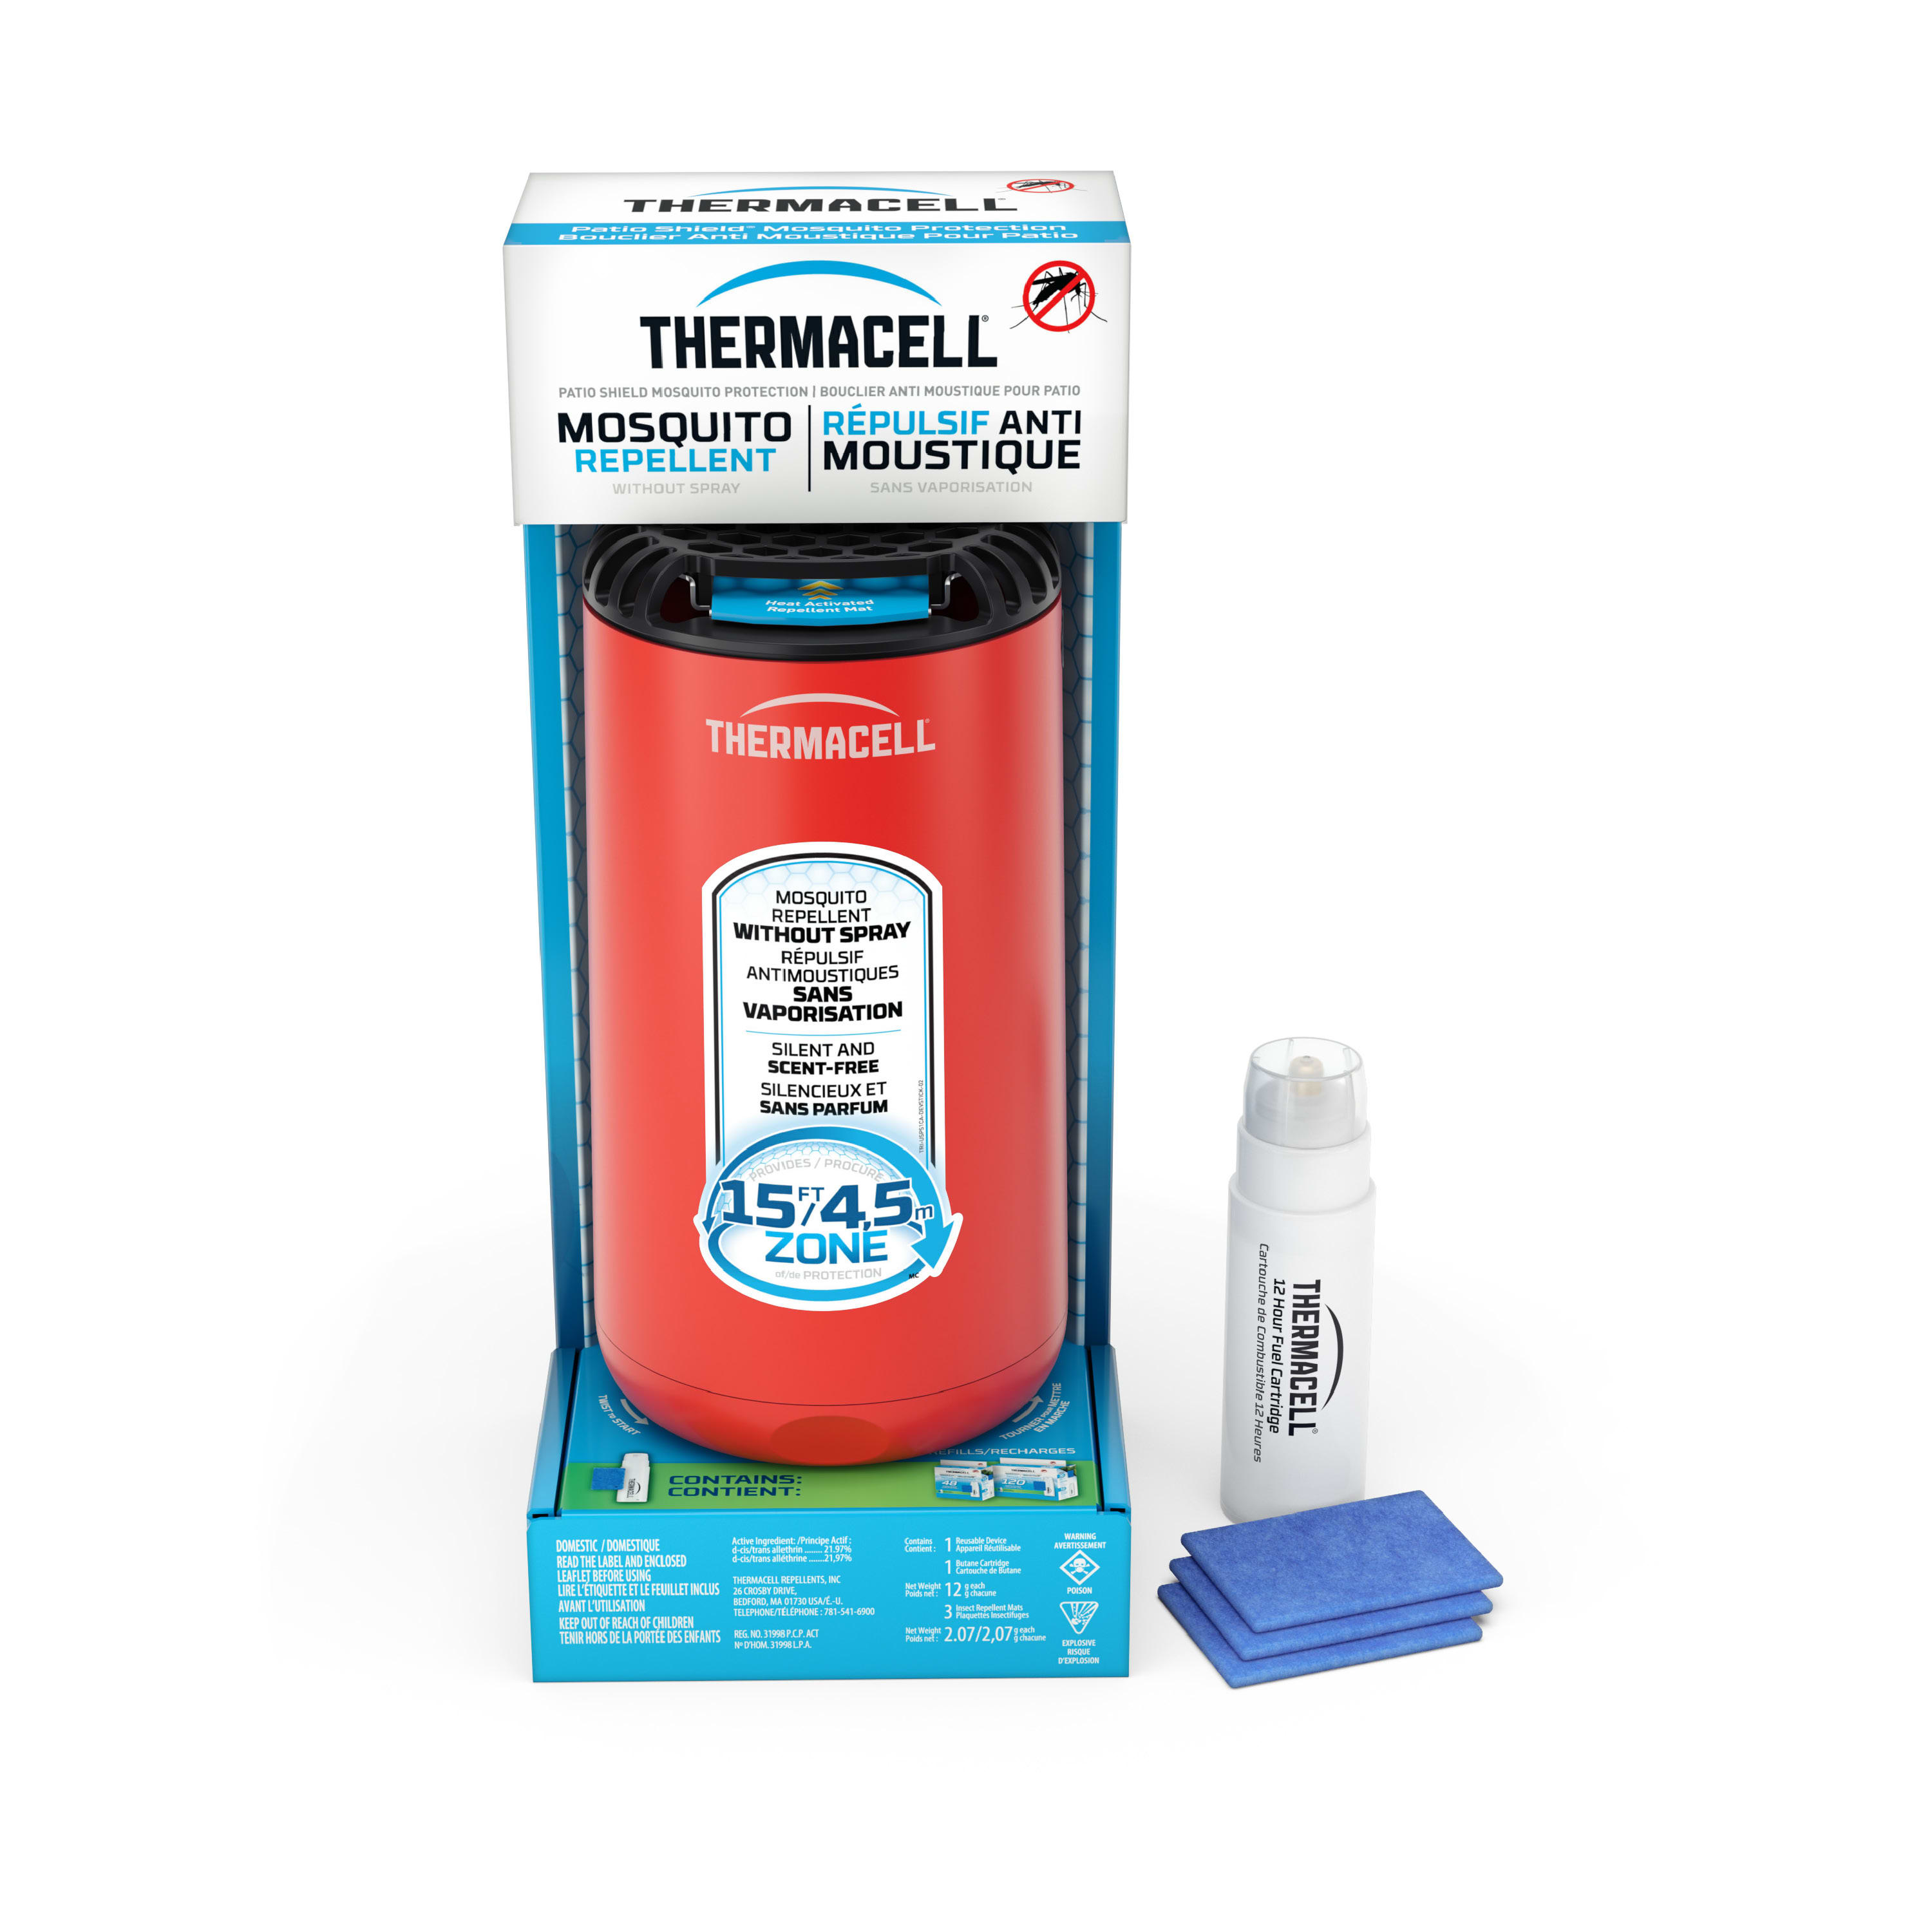 ThermaCELL® Patio Shield Mosquito Repellent - Fiesta Red